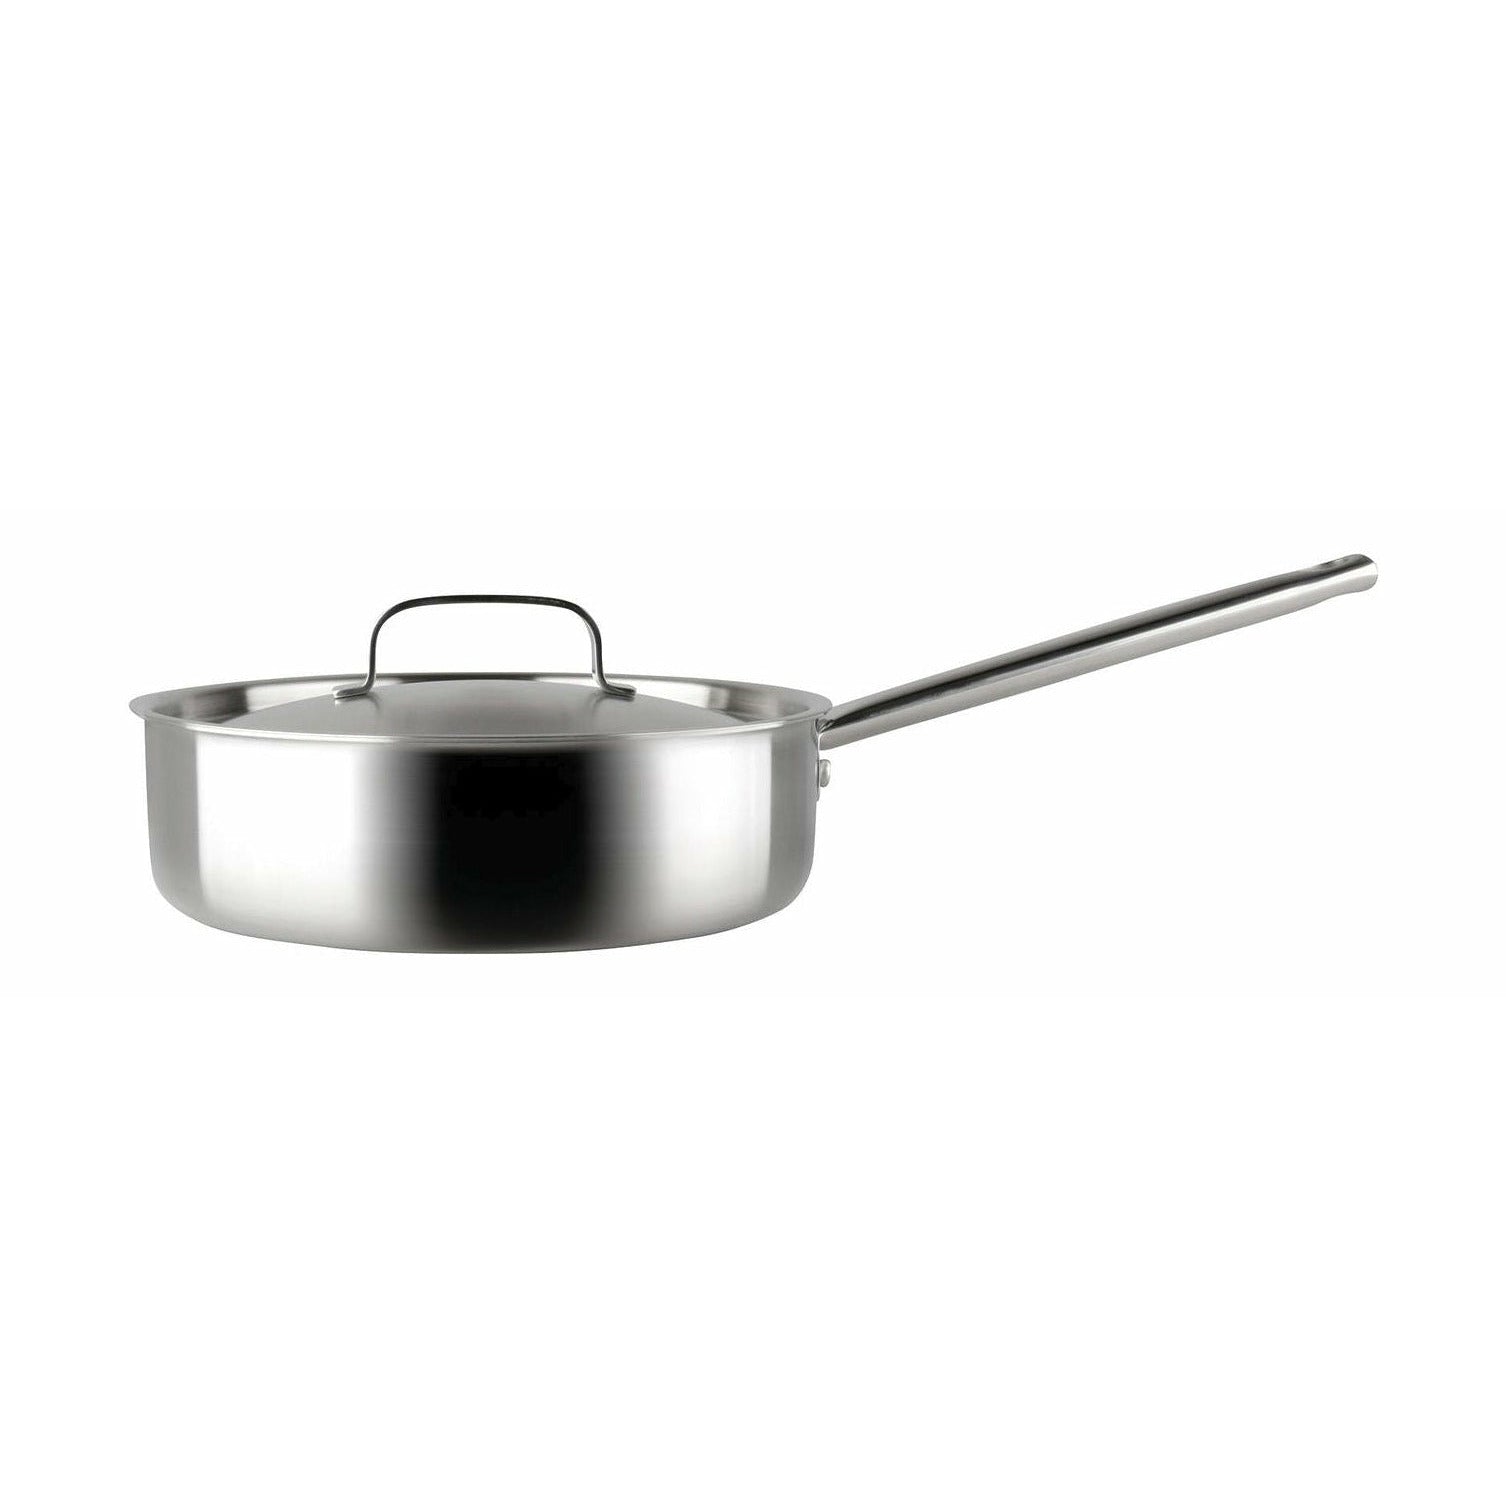 Pillivuyt Gourmet Somme Frying Pan With Lid Stainless Steel ø 24 Cm, Steel